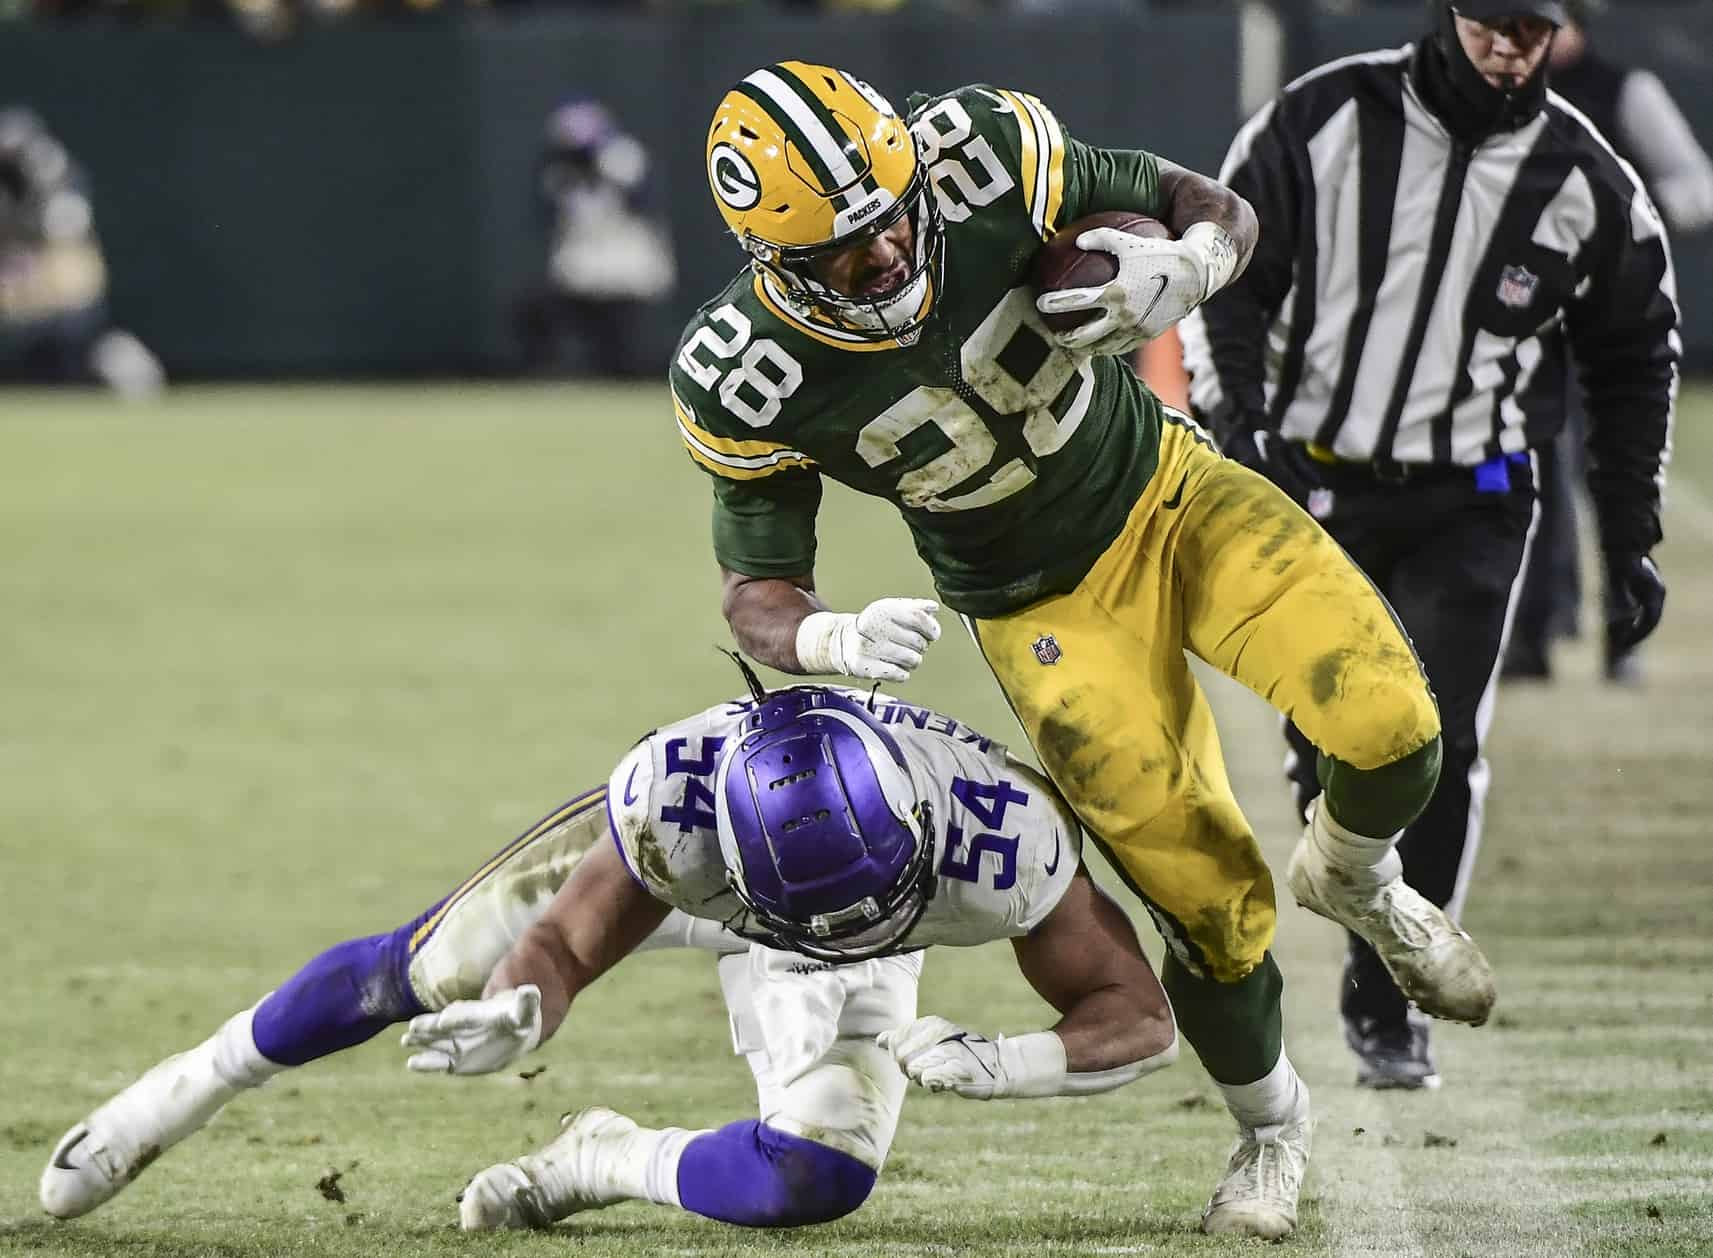 Packers RB A.J. Dillon tabbed as one of NFLPA's '2022 Rising Stars